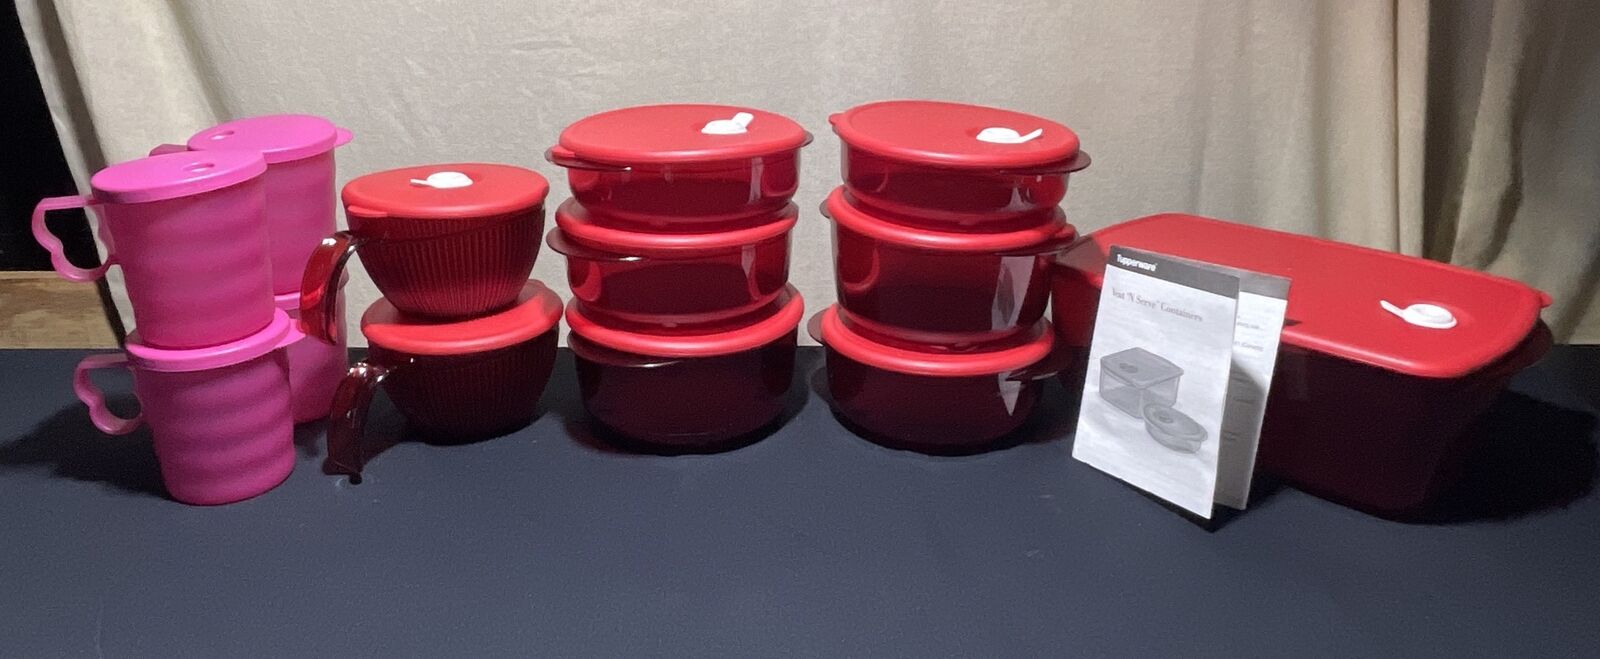 Tupperware Vent ‘N Serve Containers In Red and Pink Color Lot Of 13